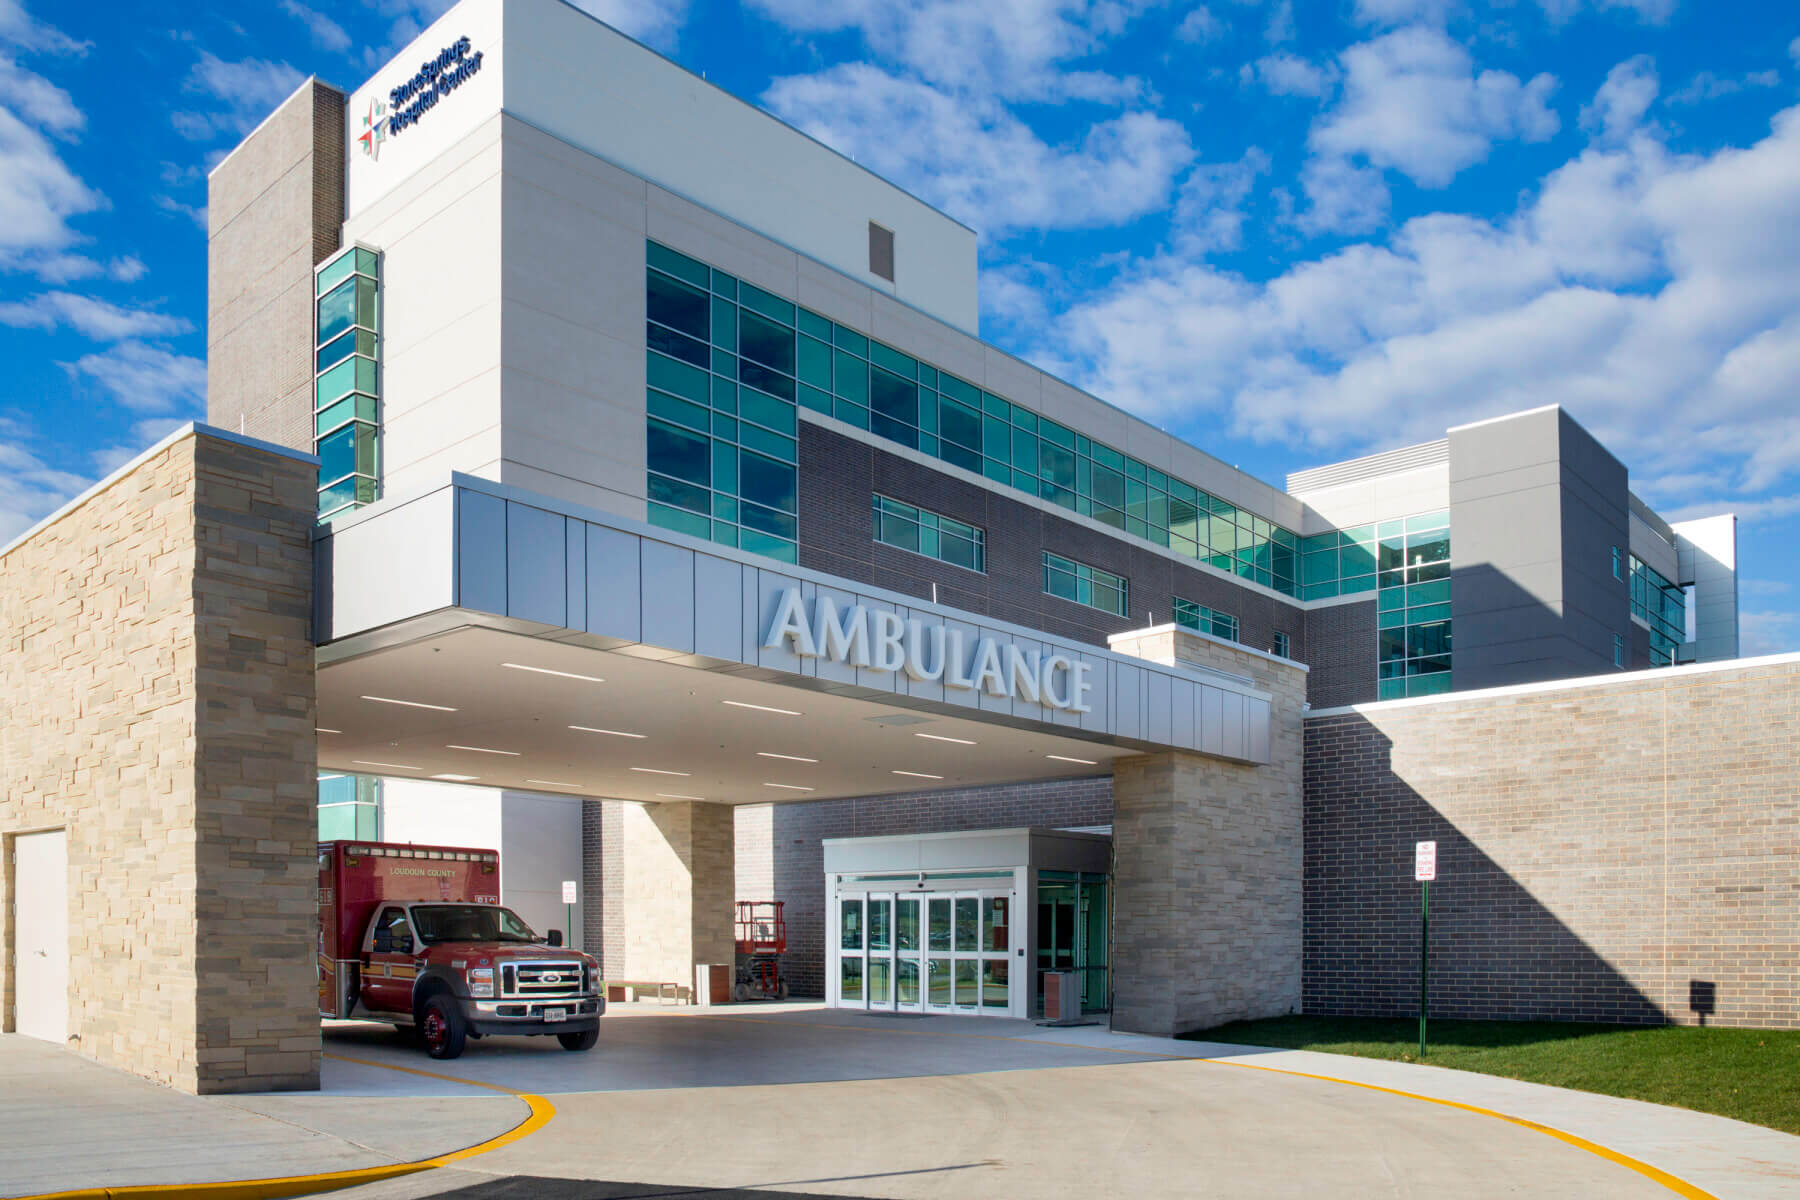 ambulatory entrance with a red ambulance parked near the facility doors